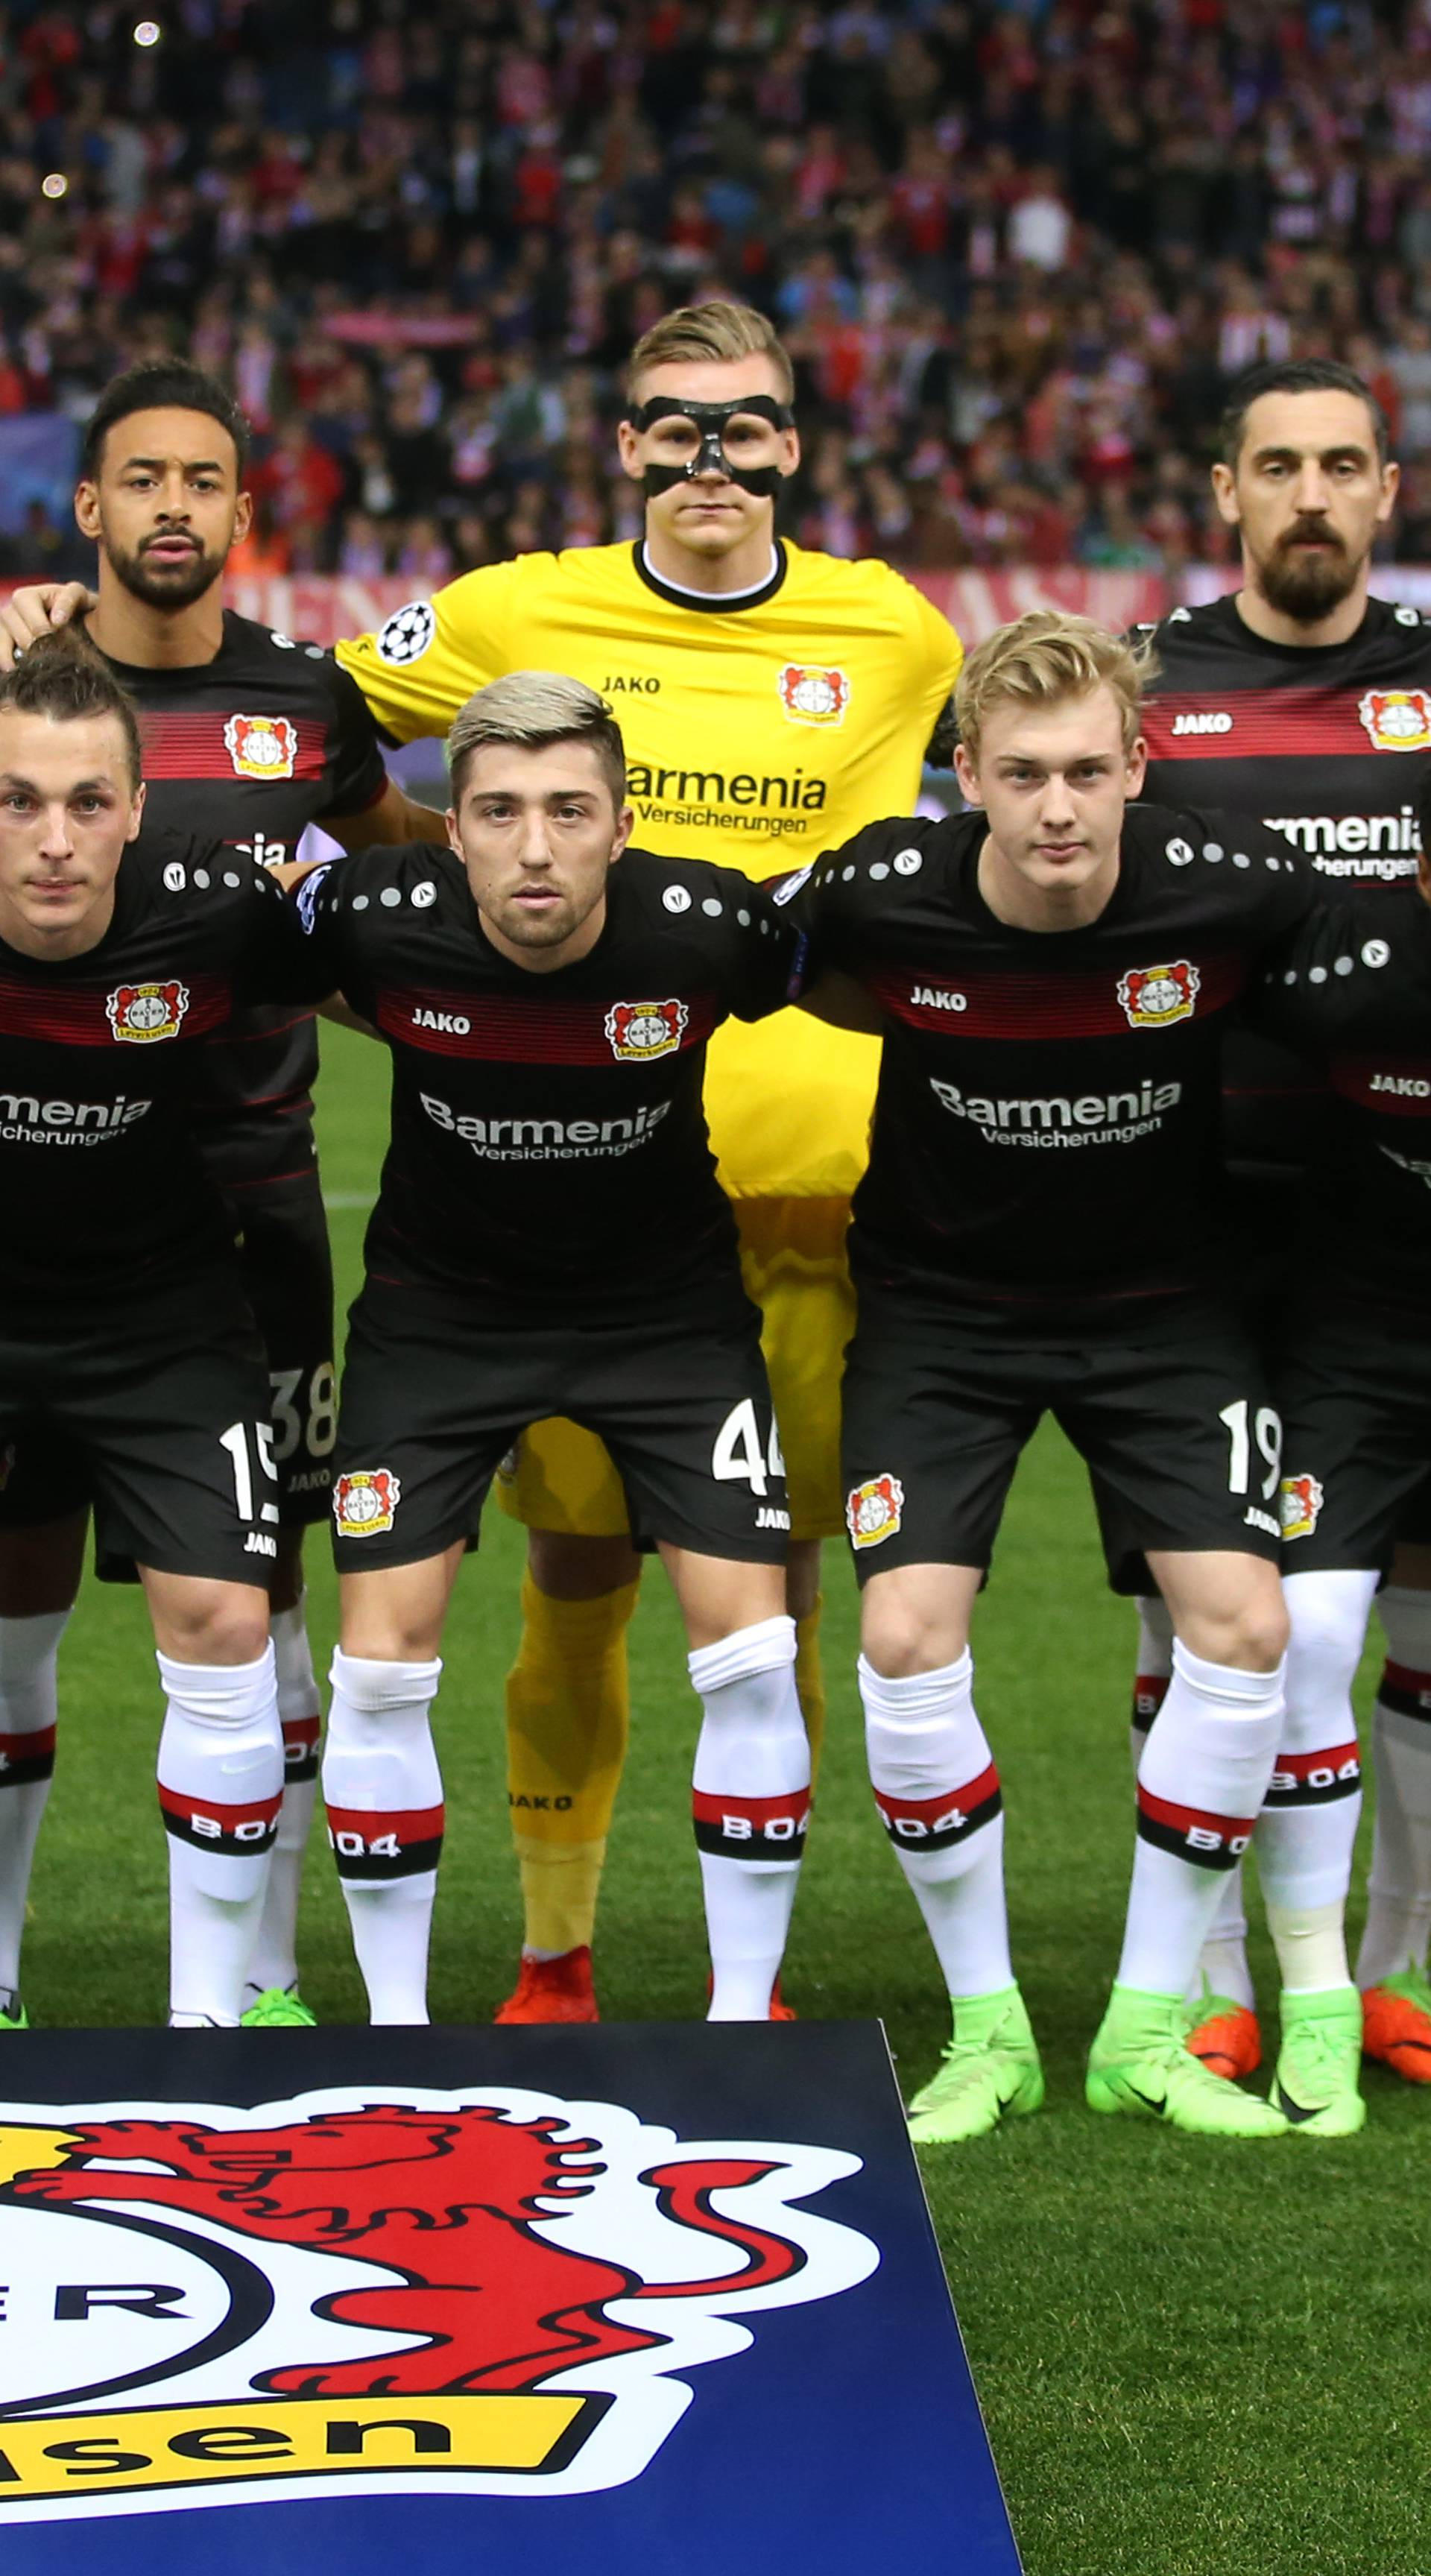 Bayer Leverkusen players pose for a team group photo before the match